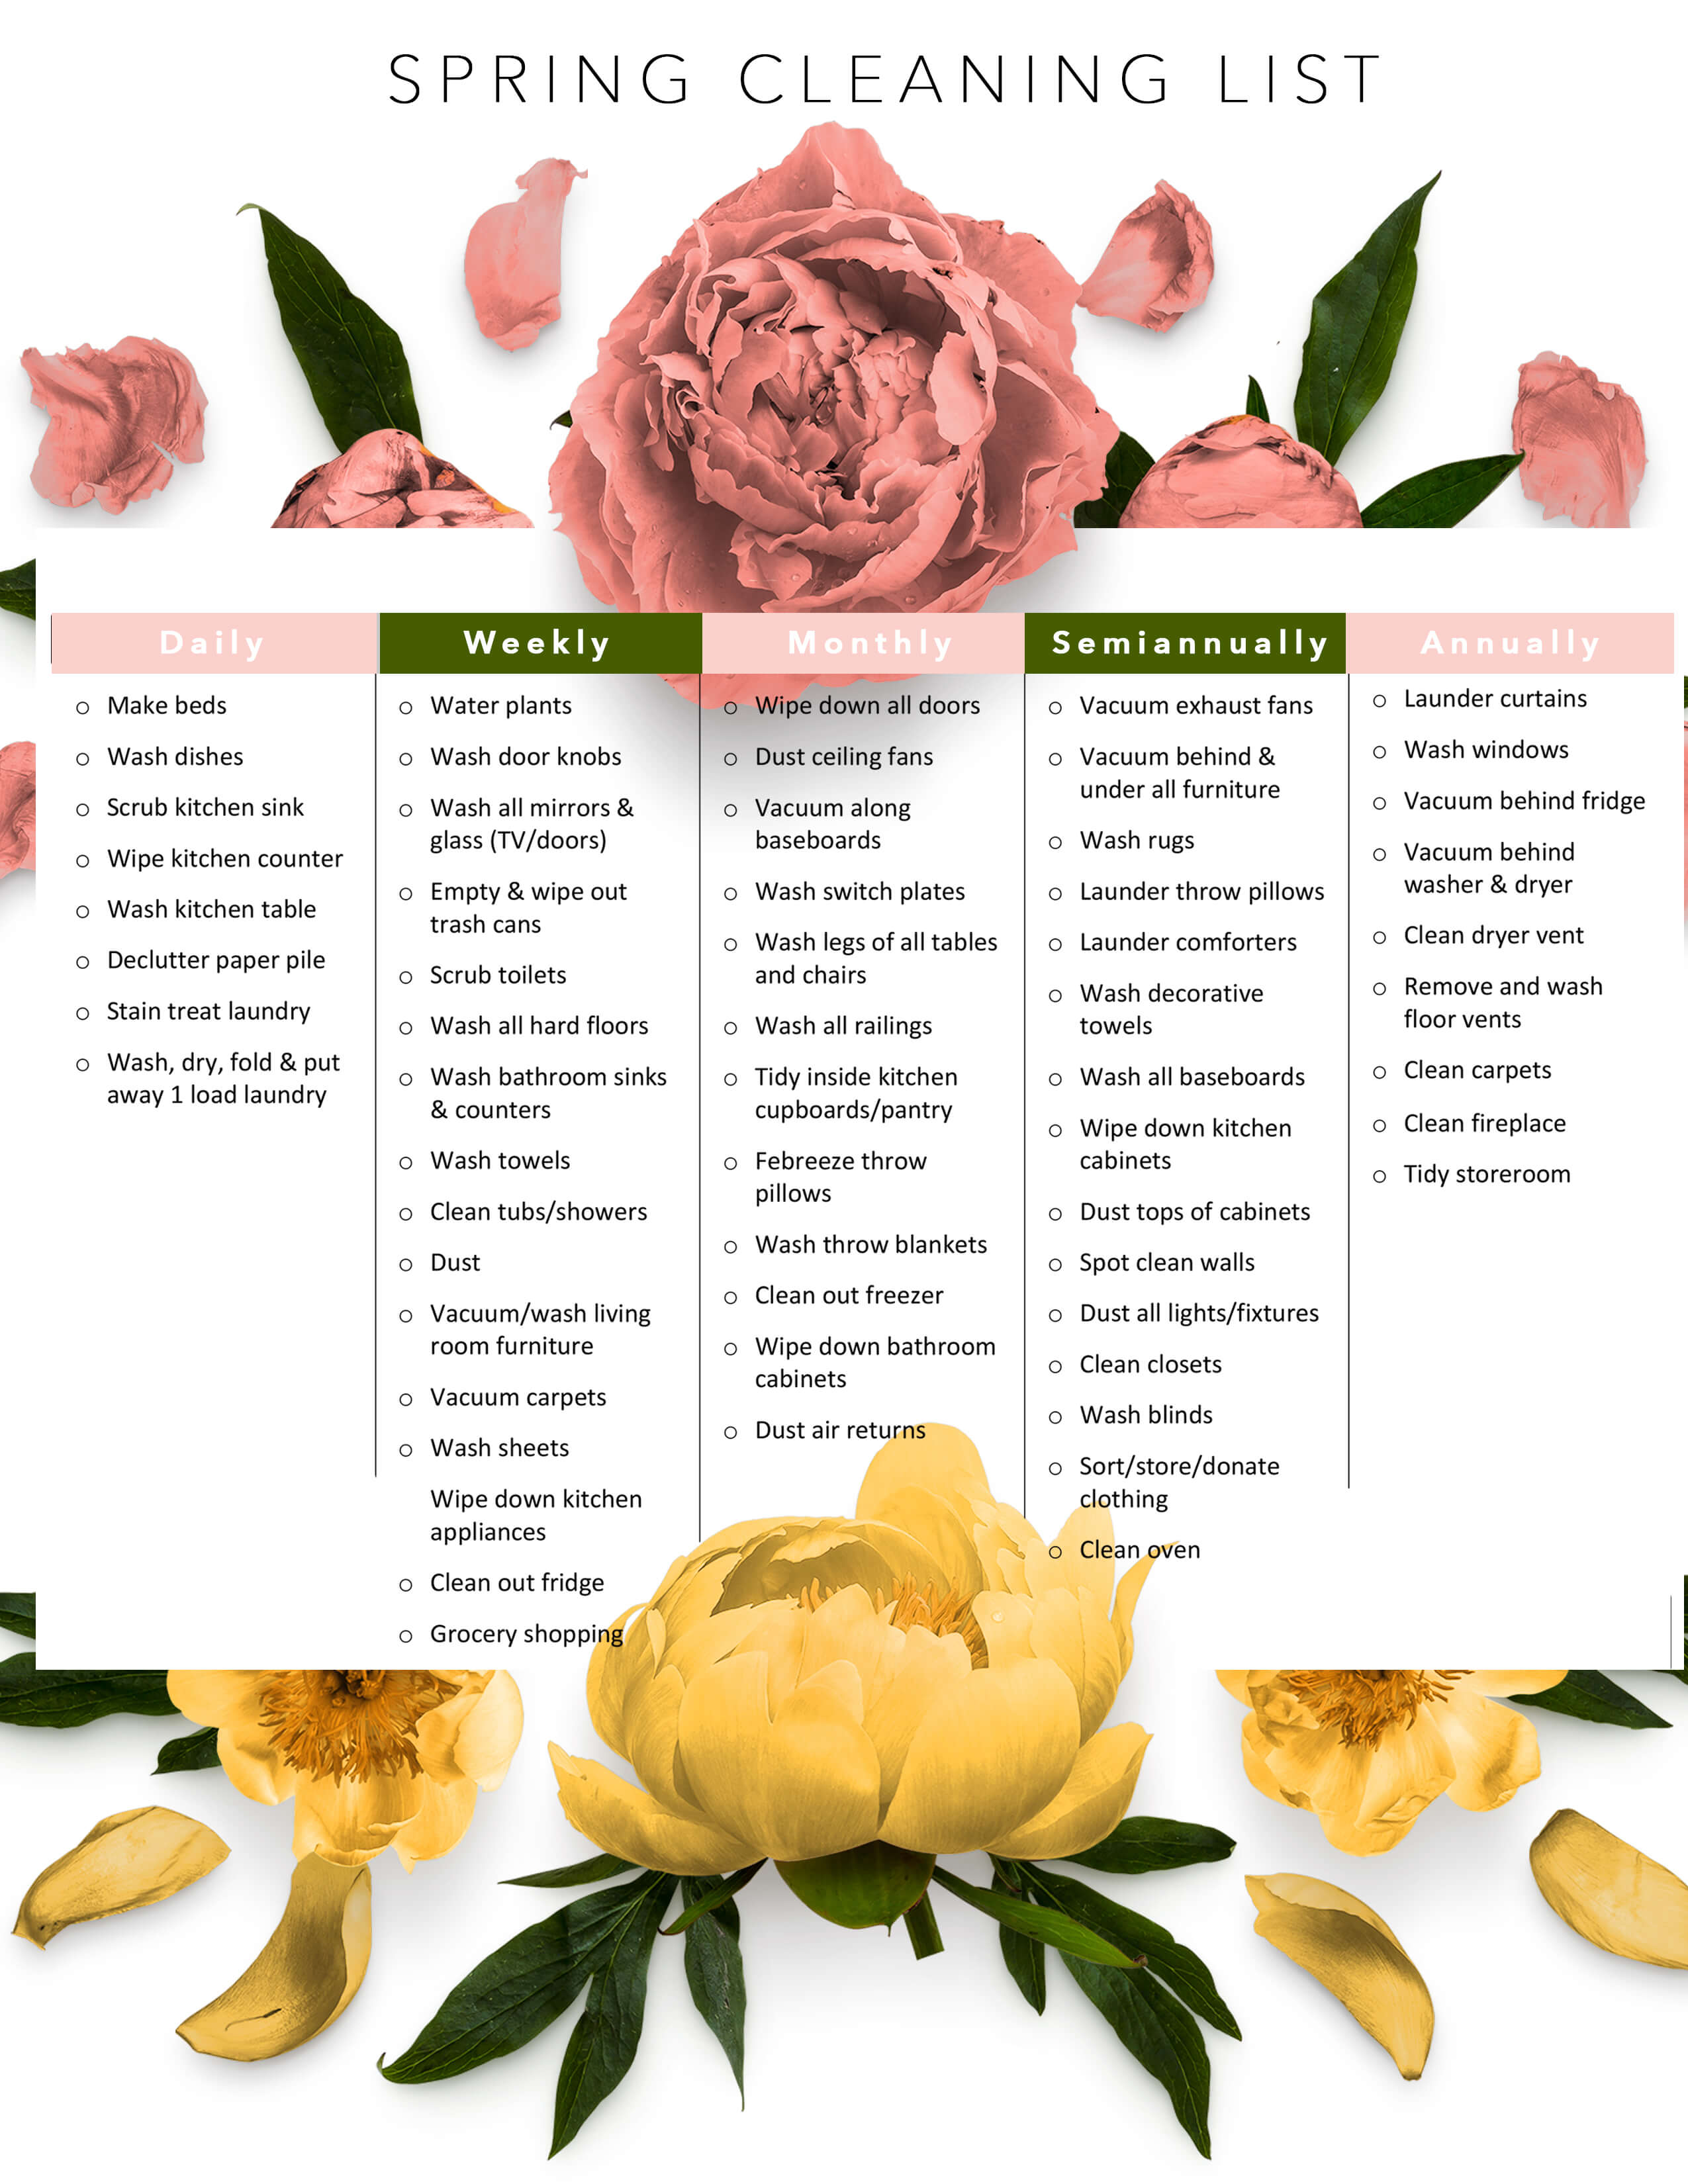 FREE DOWNLOAD SPRING CLEANING LIST